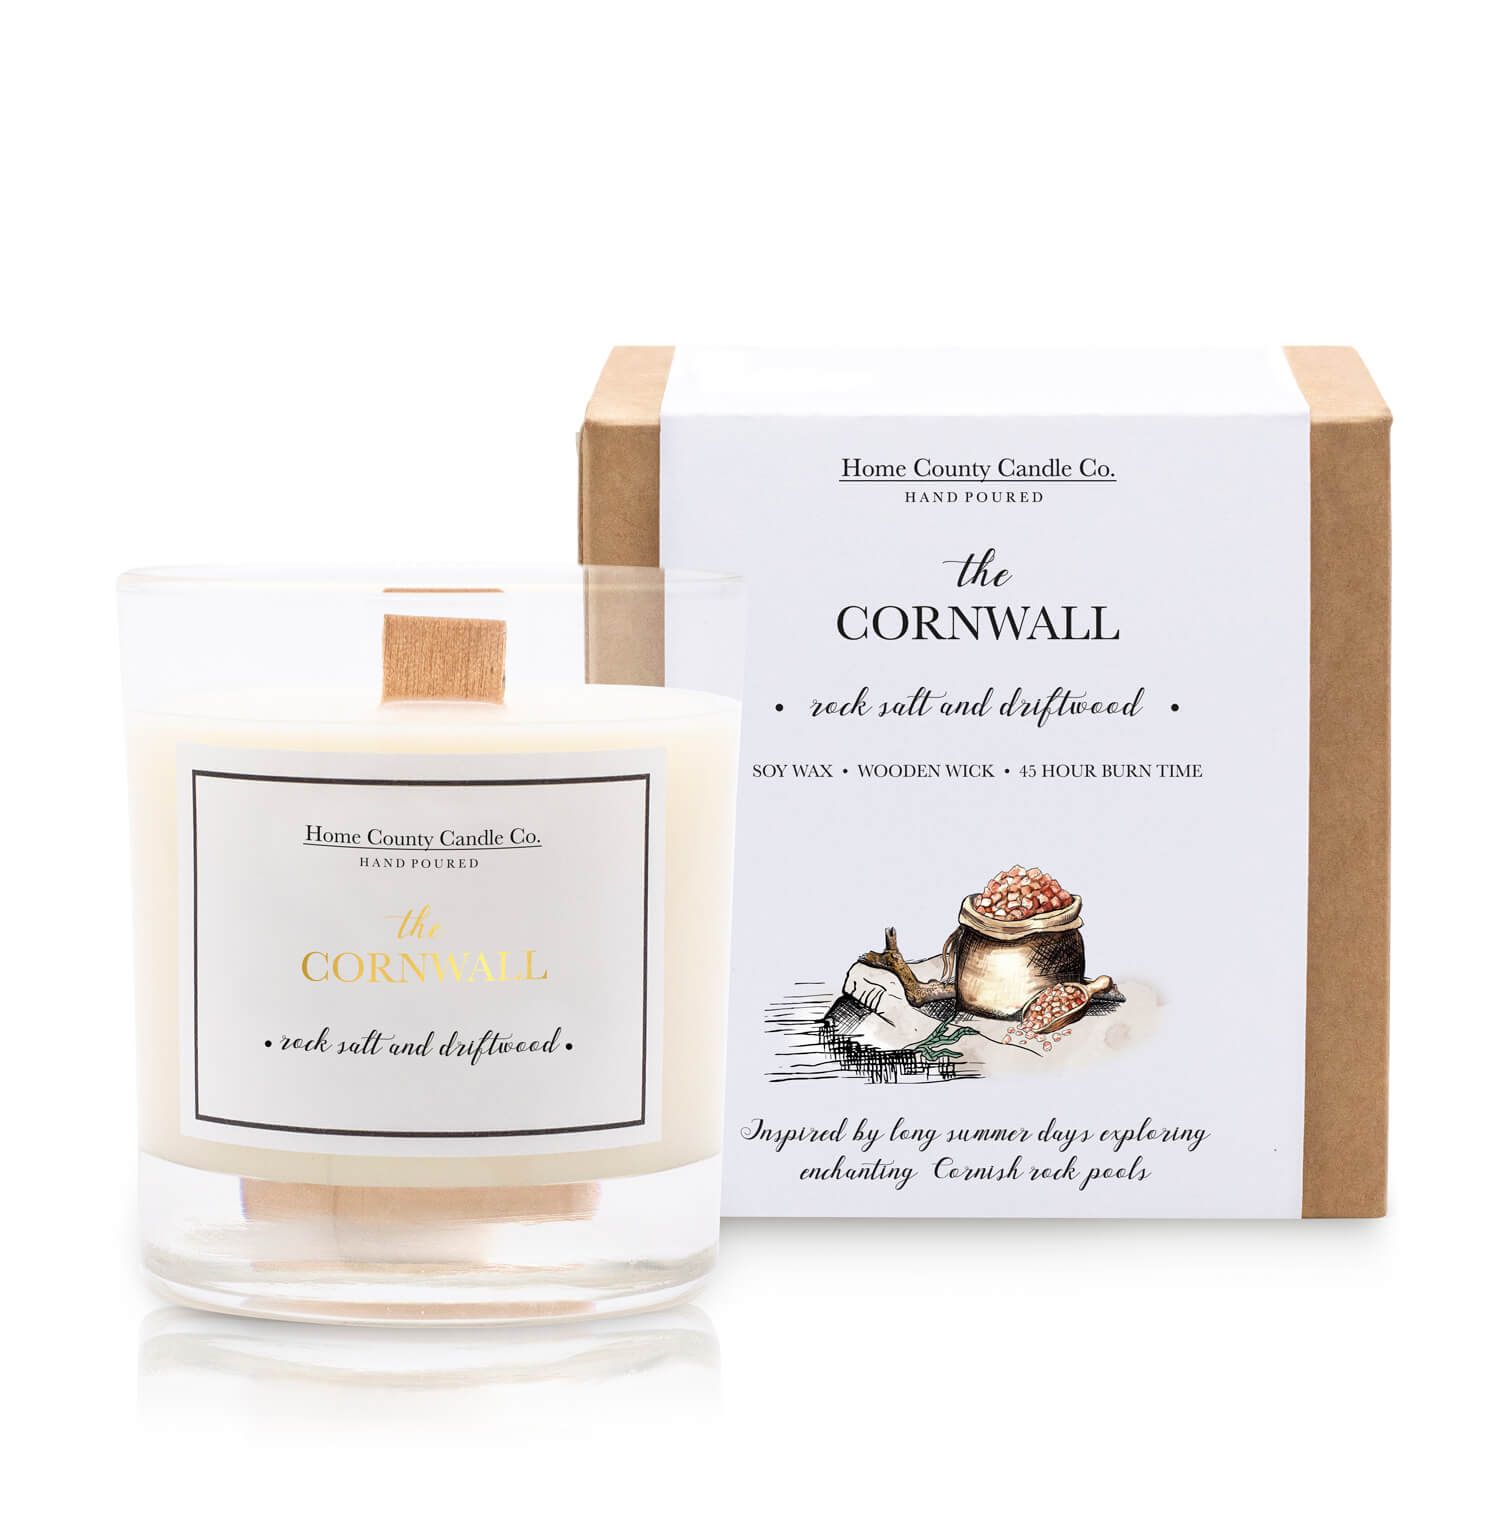 The Cornwall - Rock Salt and Driftwood Soy Candle